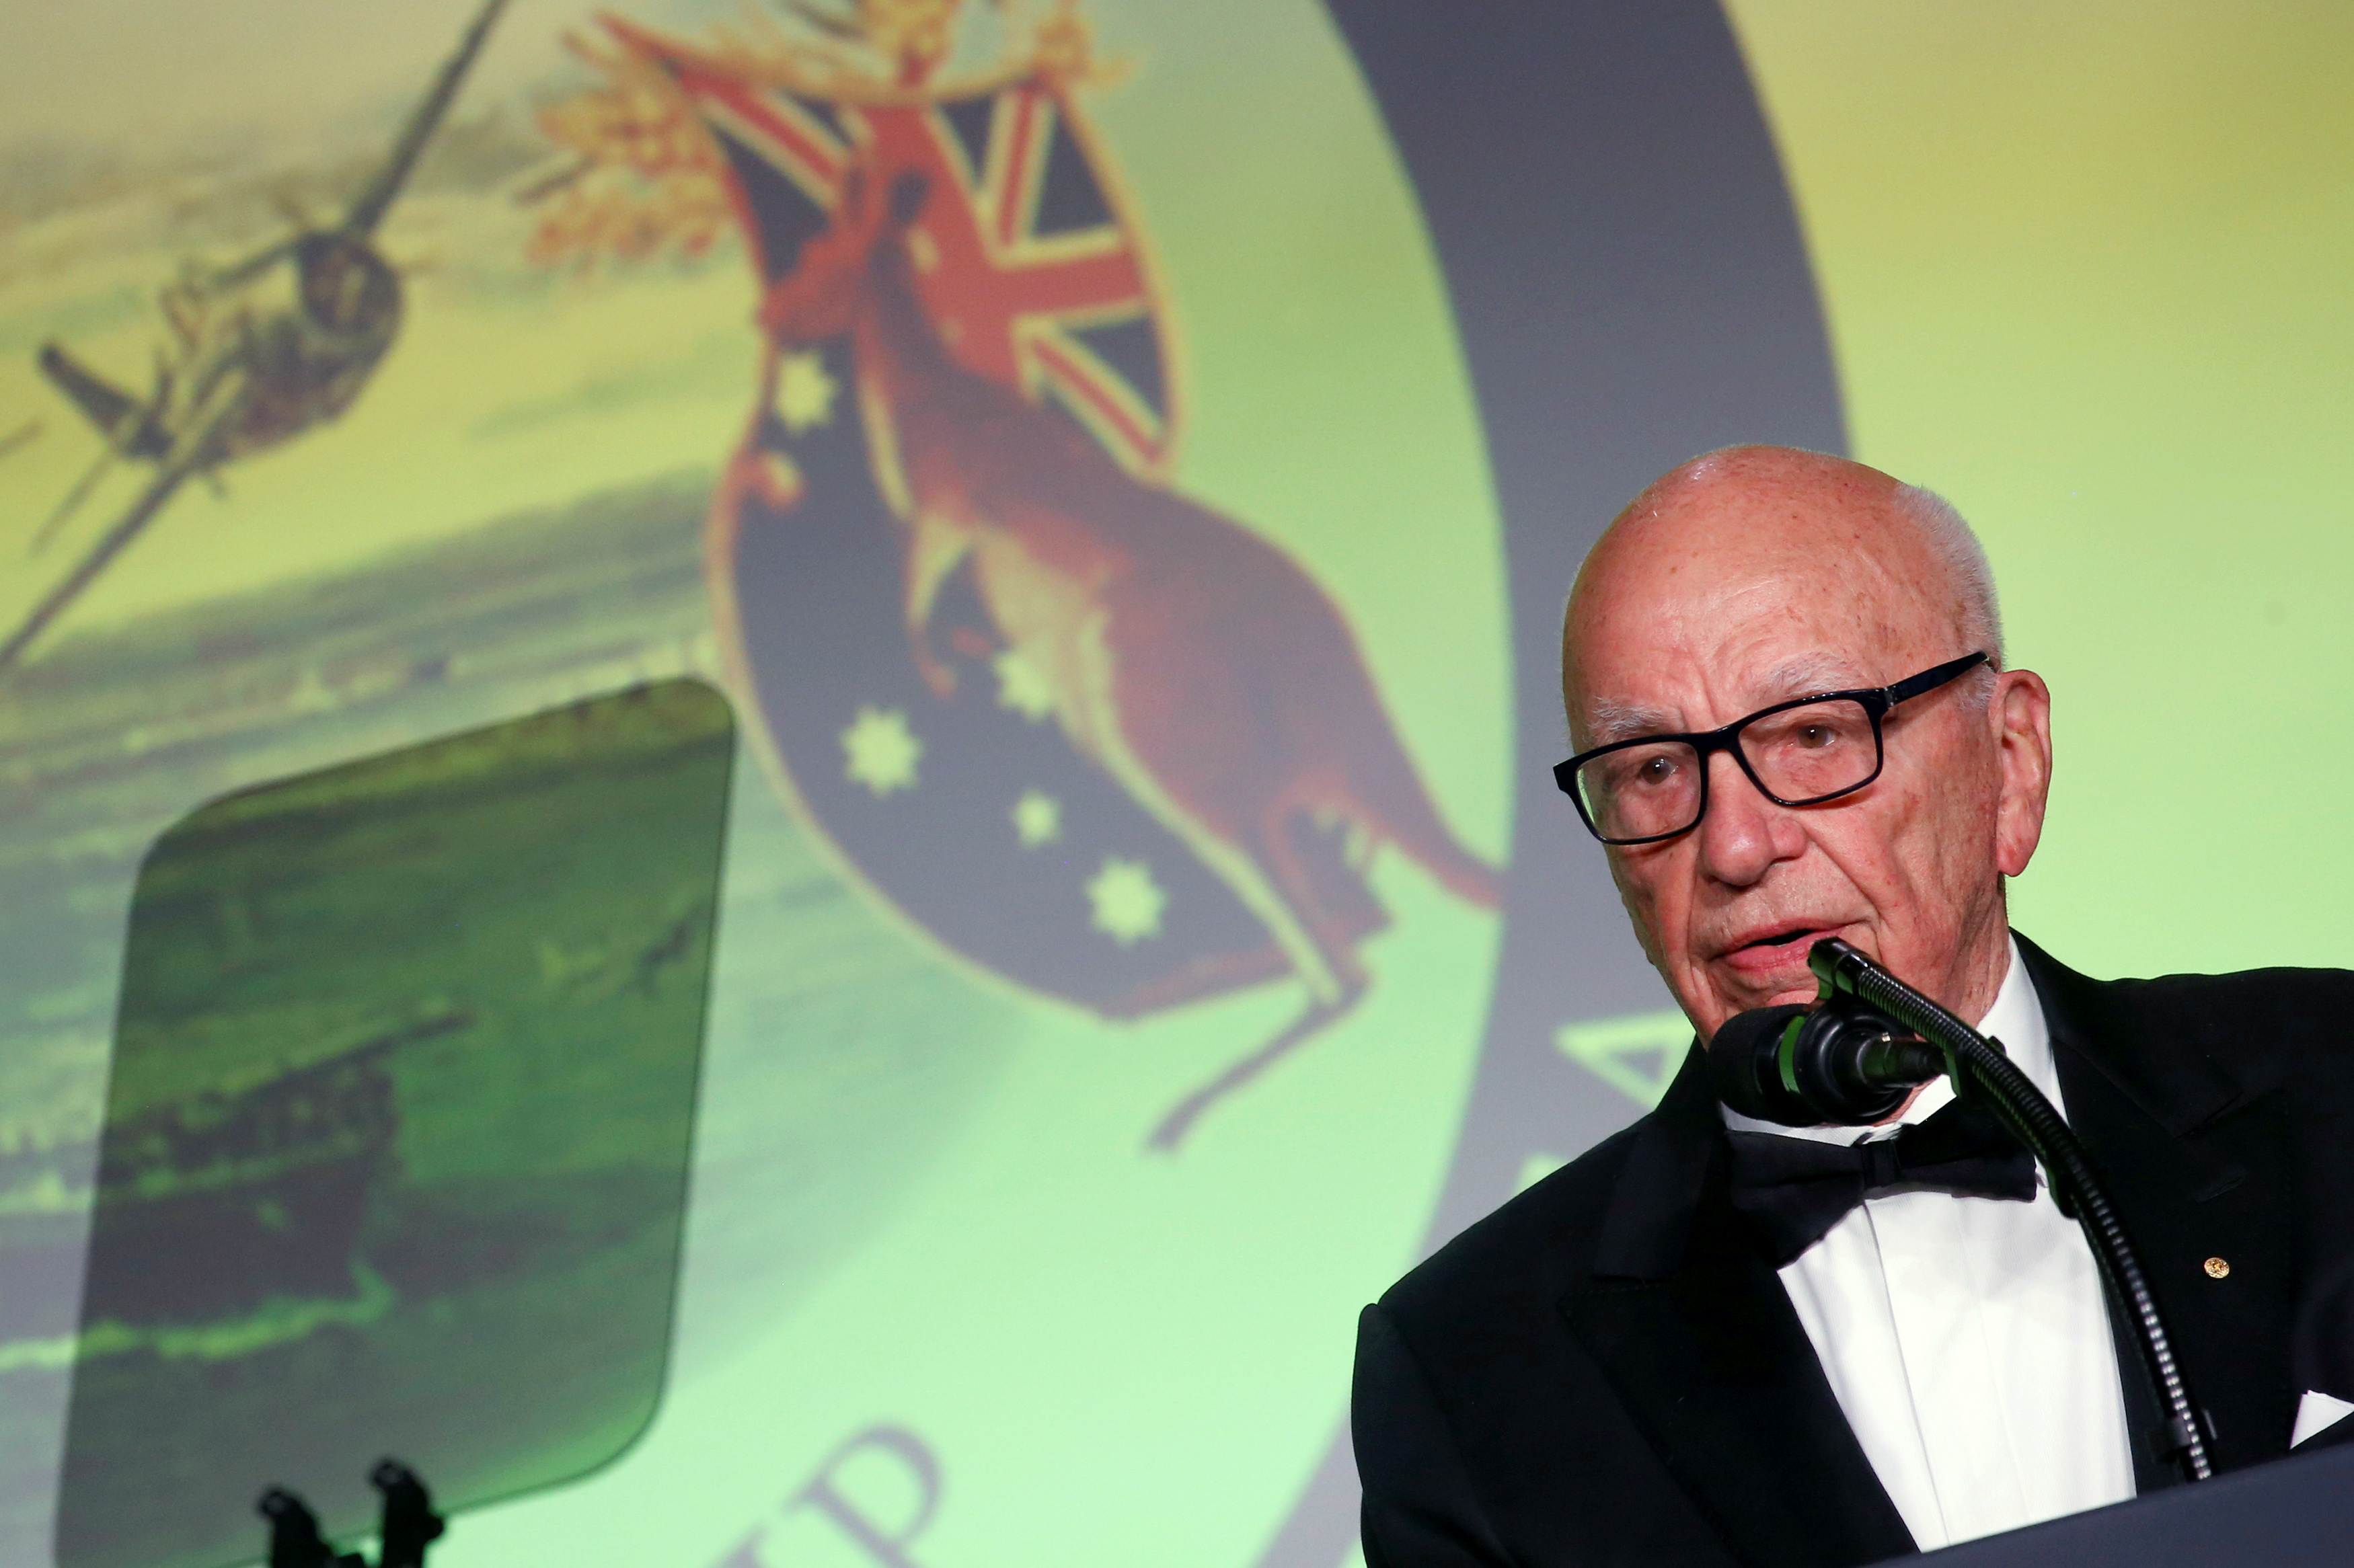 Murdoch delivers remarks at an event commemorating the 75th anniversary of the Battle of the Coral Sea in New York